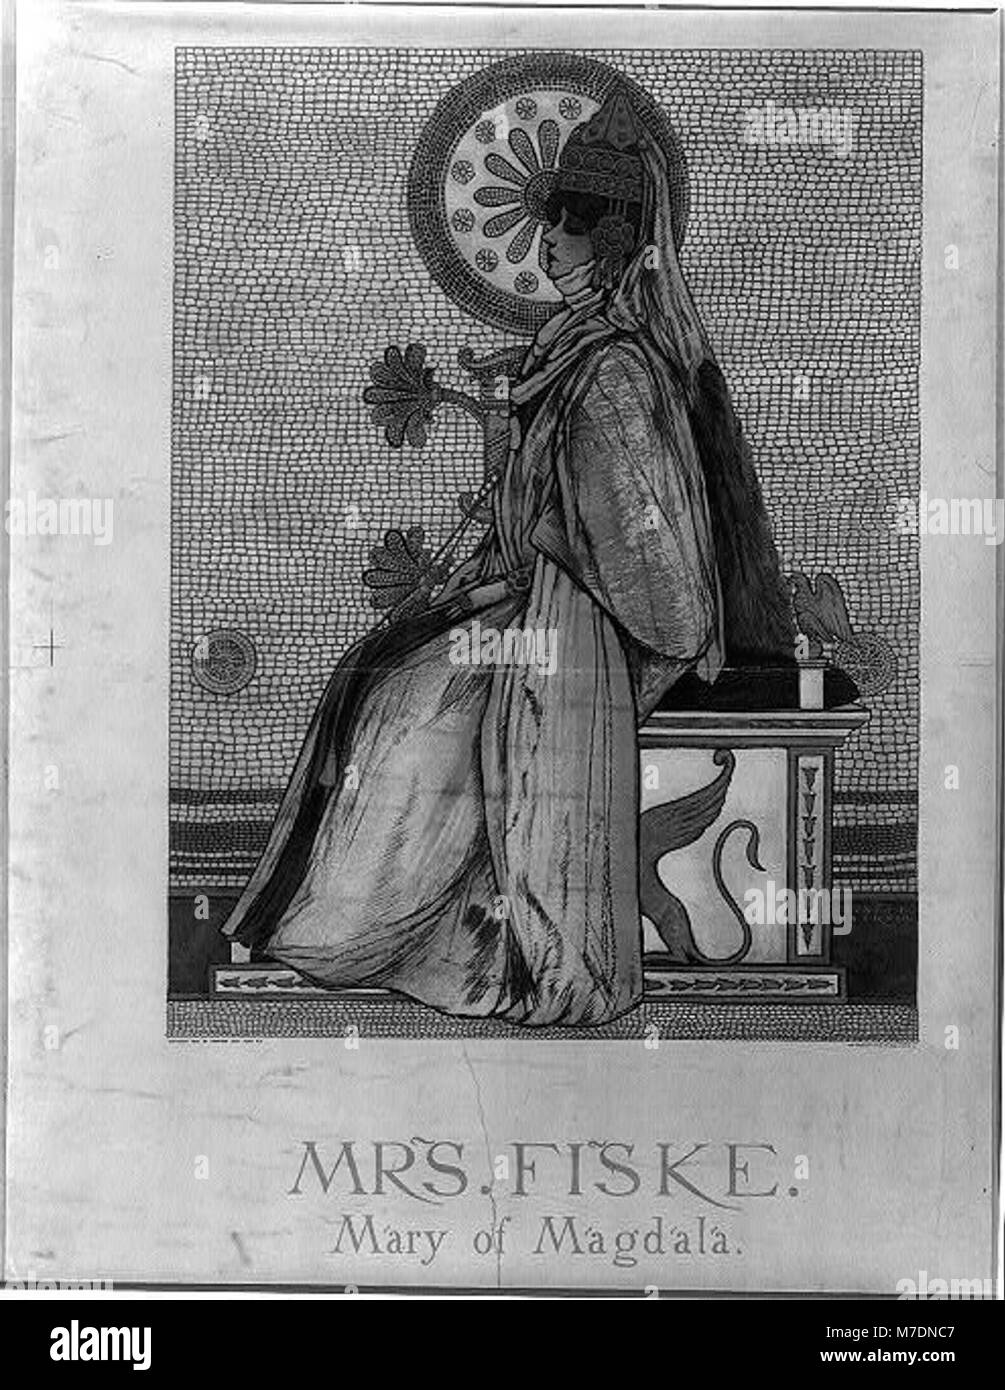 Mrs. Fiske - Mary of Magdala - Ernest Haskell. LCCN2007681312 Stock Photo